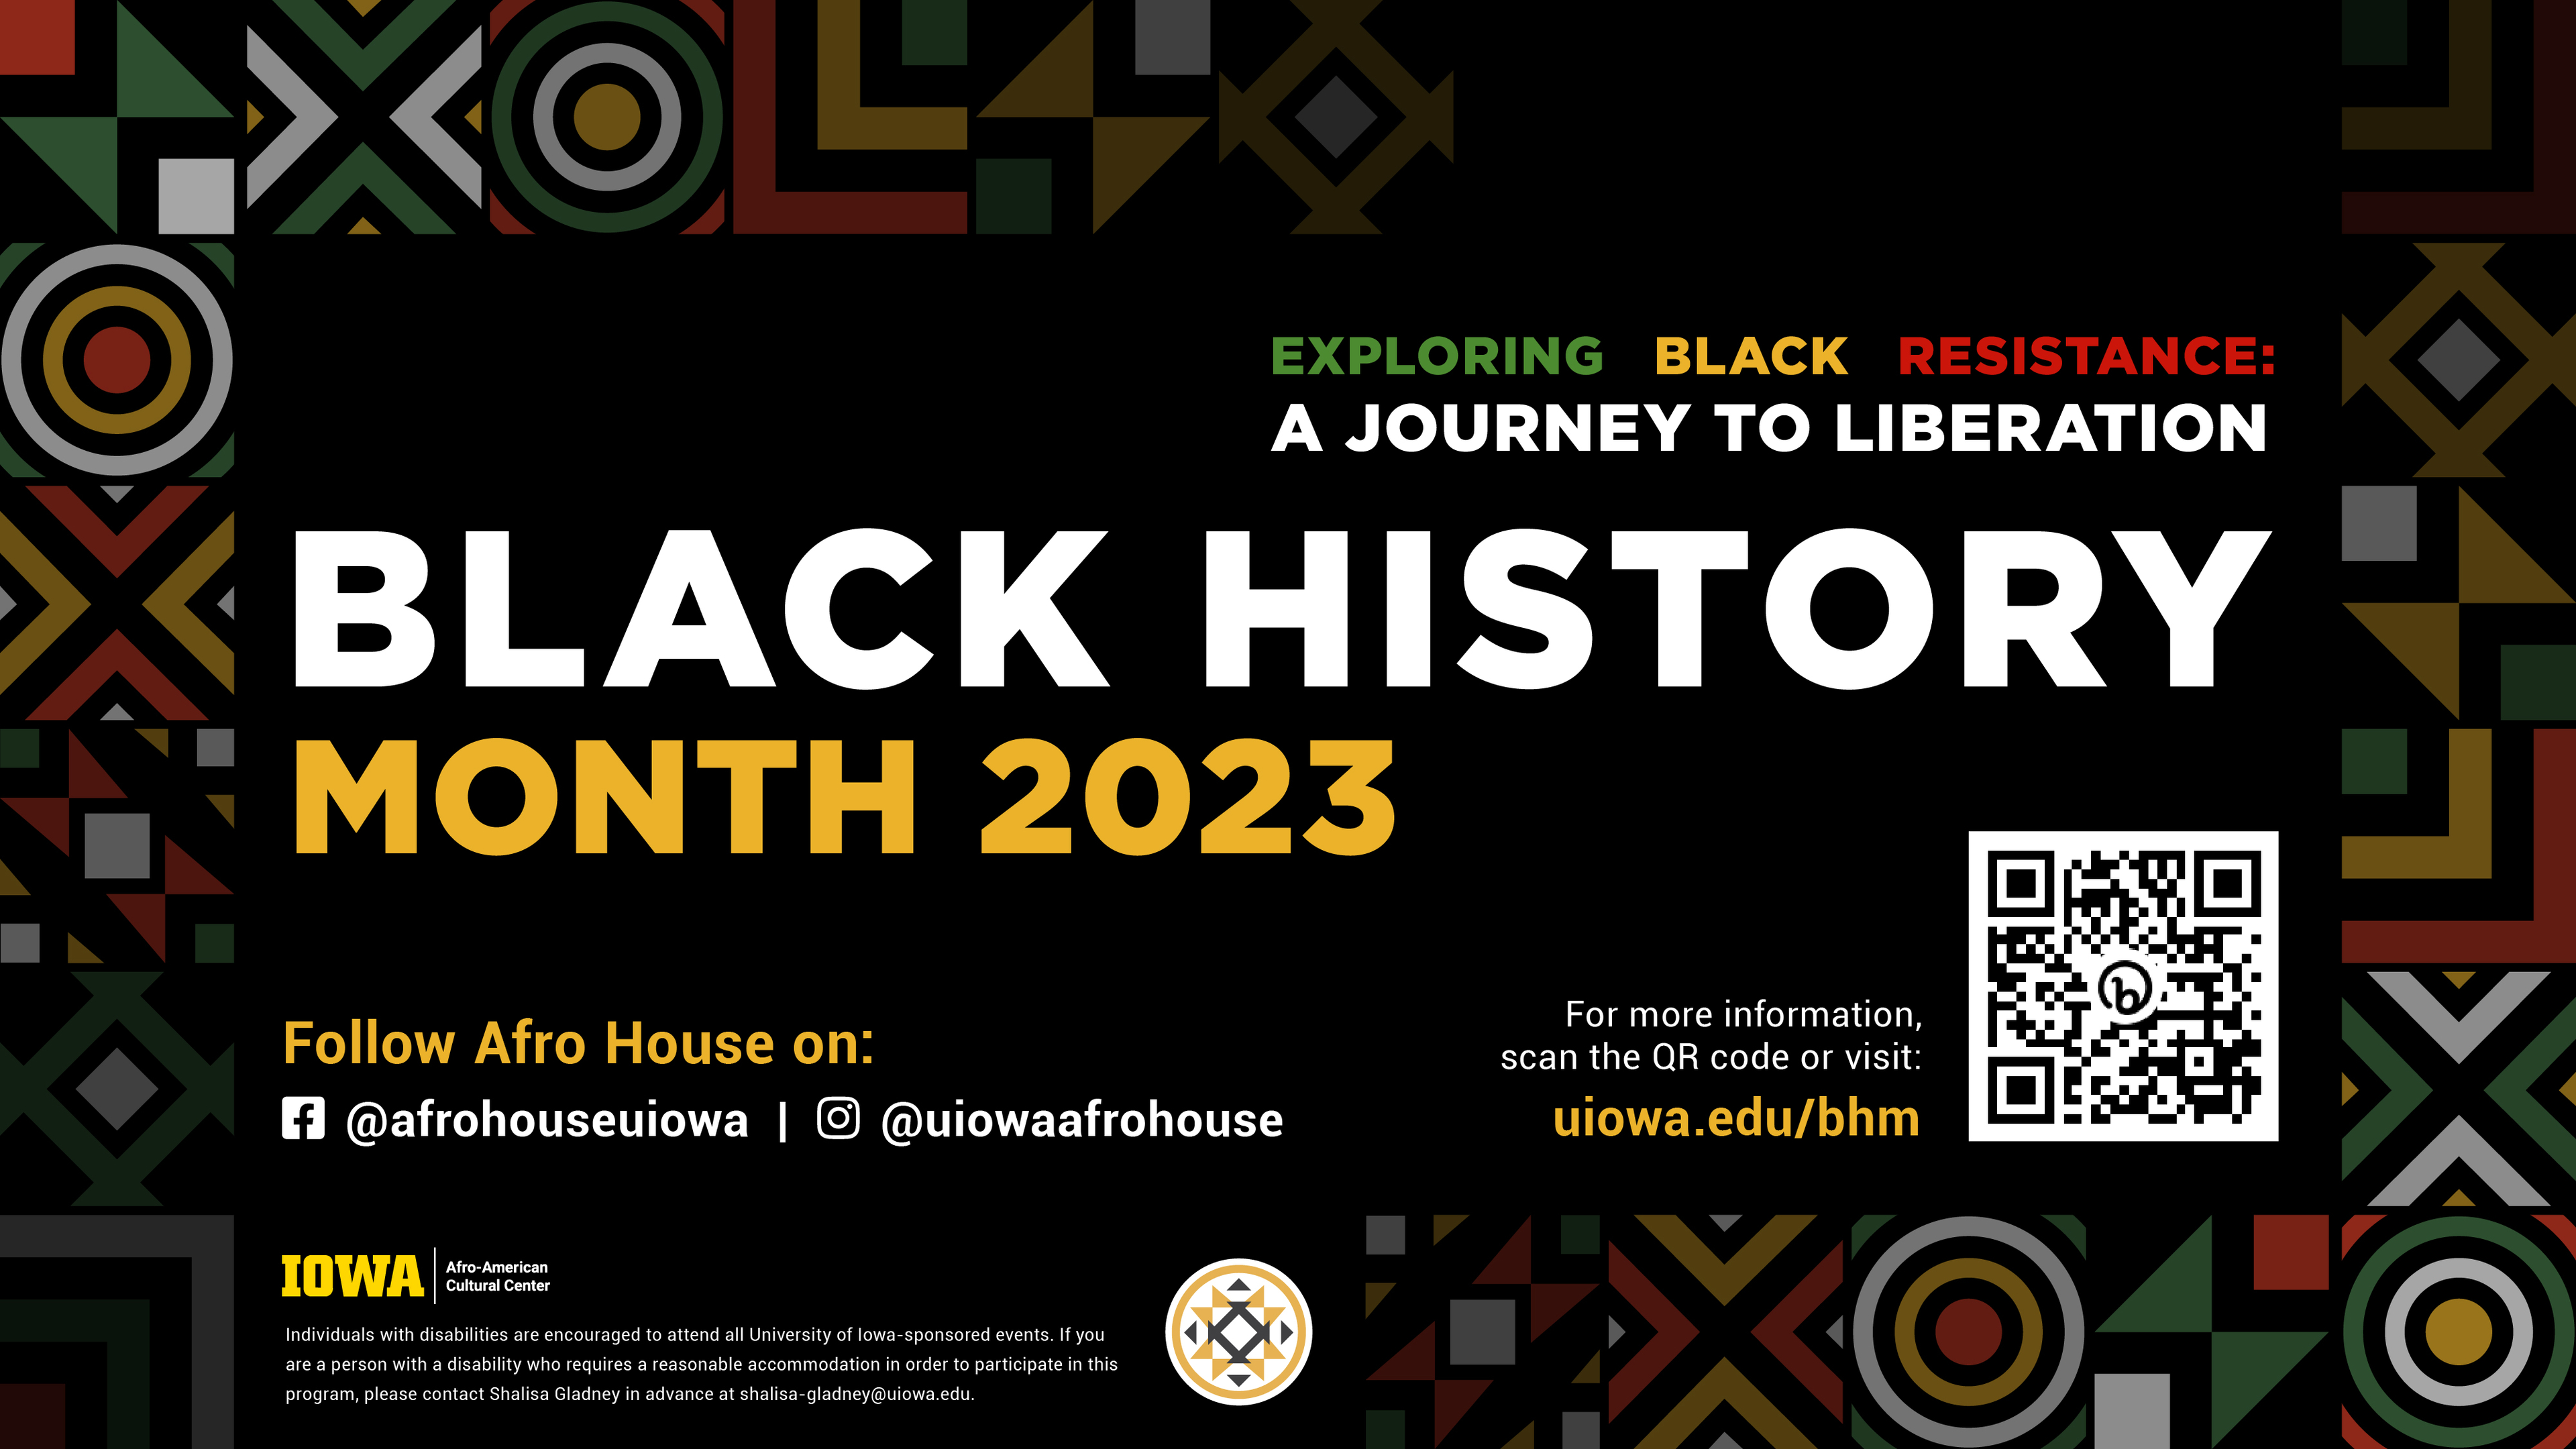 Exploring Black Resistance: A Journey to Liberation; Black History Month 2023; For more information scan the QR code or visit: uiowa.edu/bhm